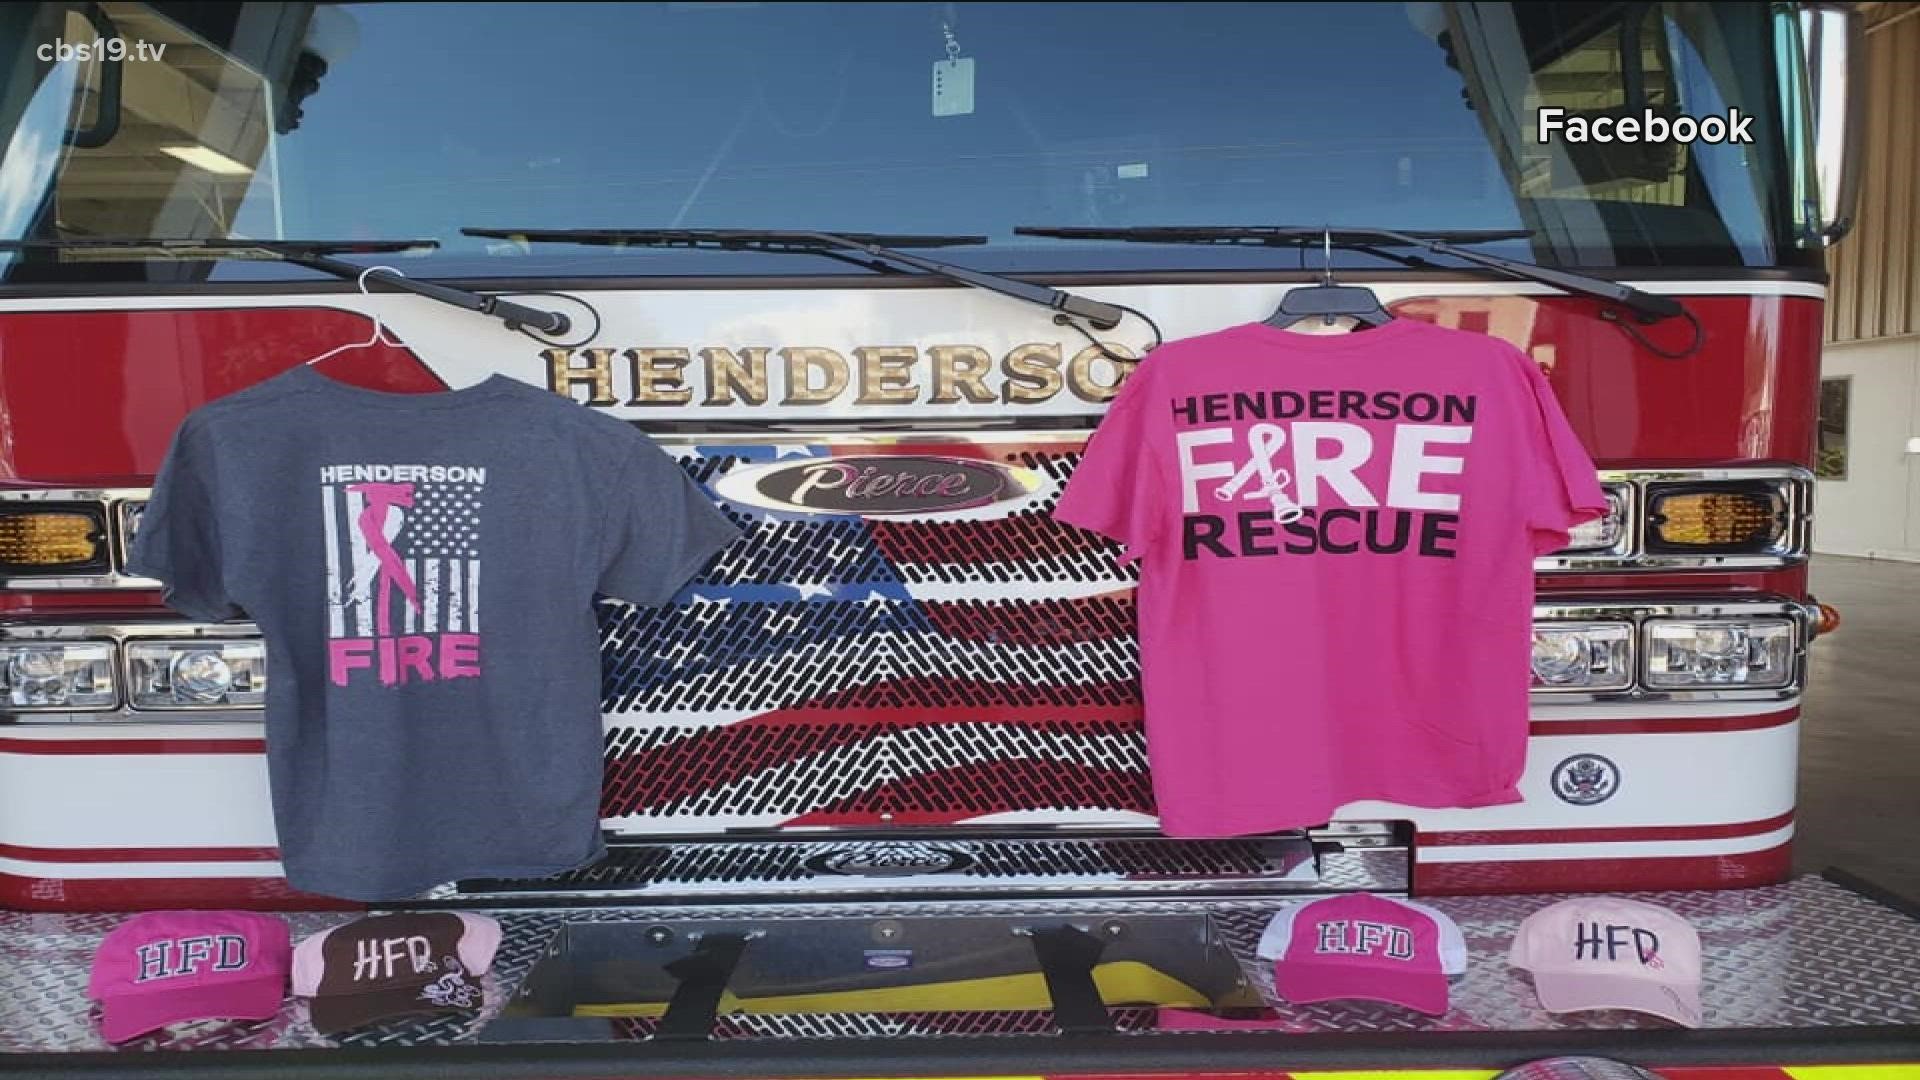 When someone is hurting in Henderson, neighbors respond. One group leading the way is the Henderson Fire Dept. who are trying to ease the burden on cancer patients.